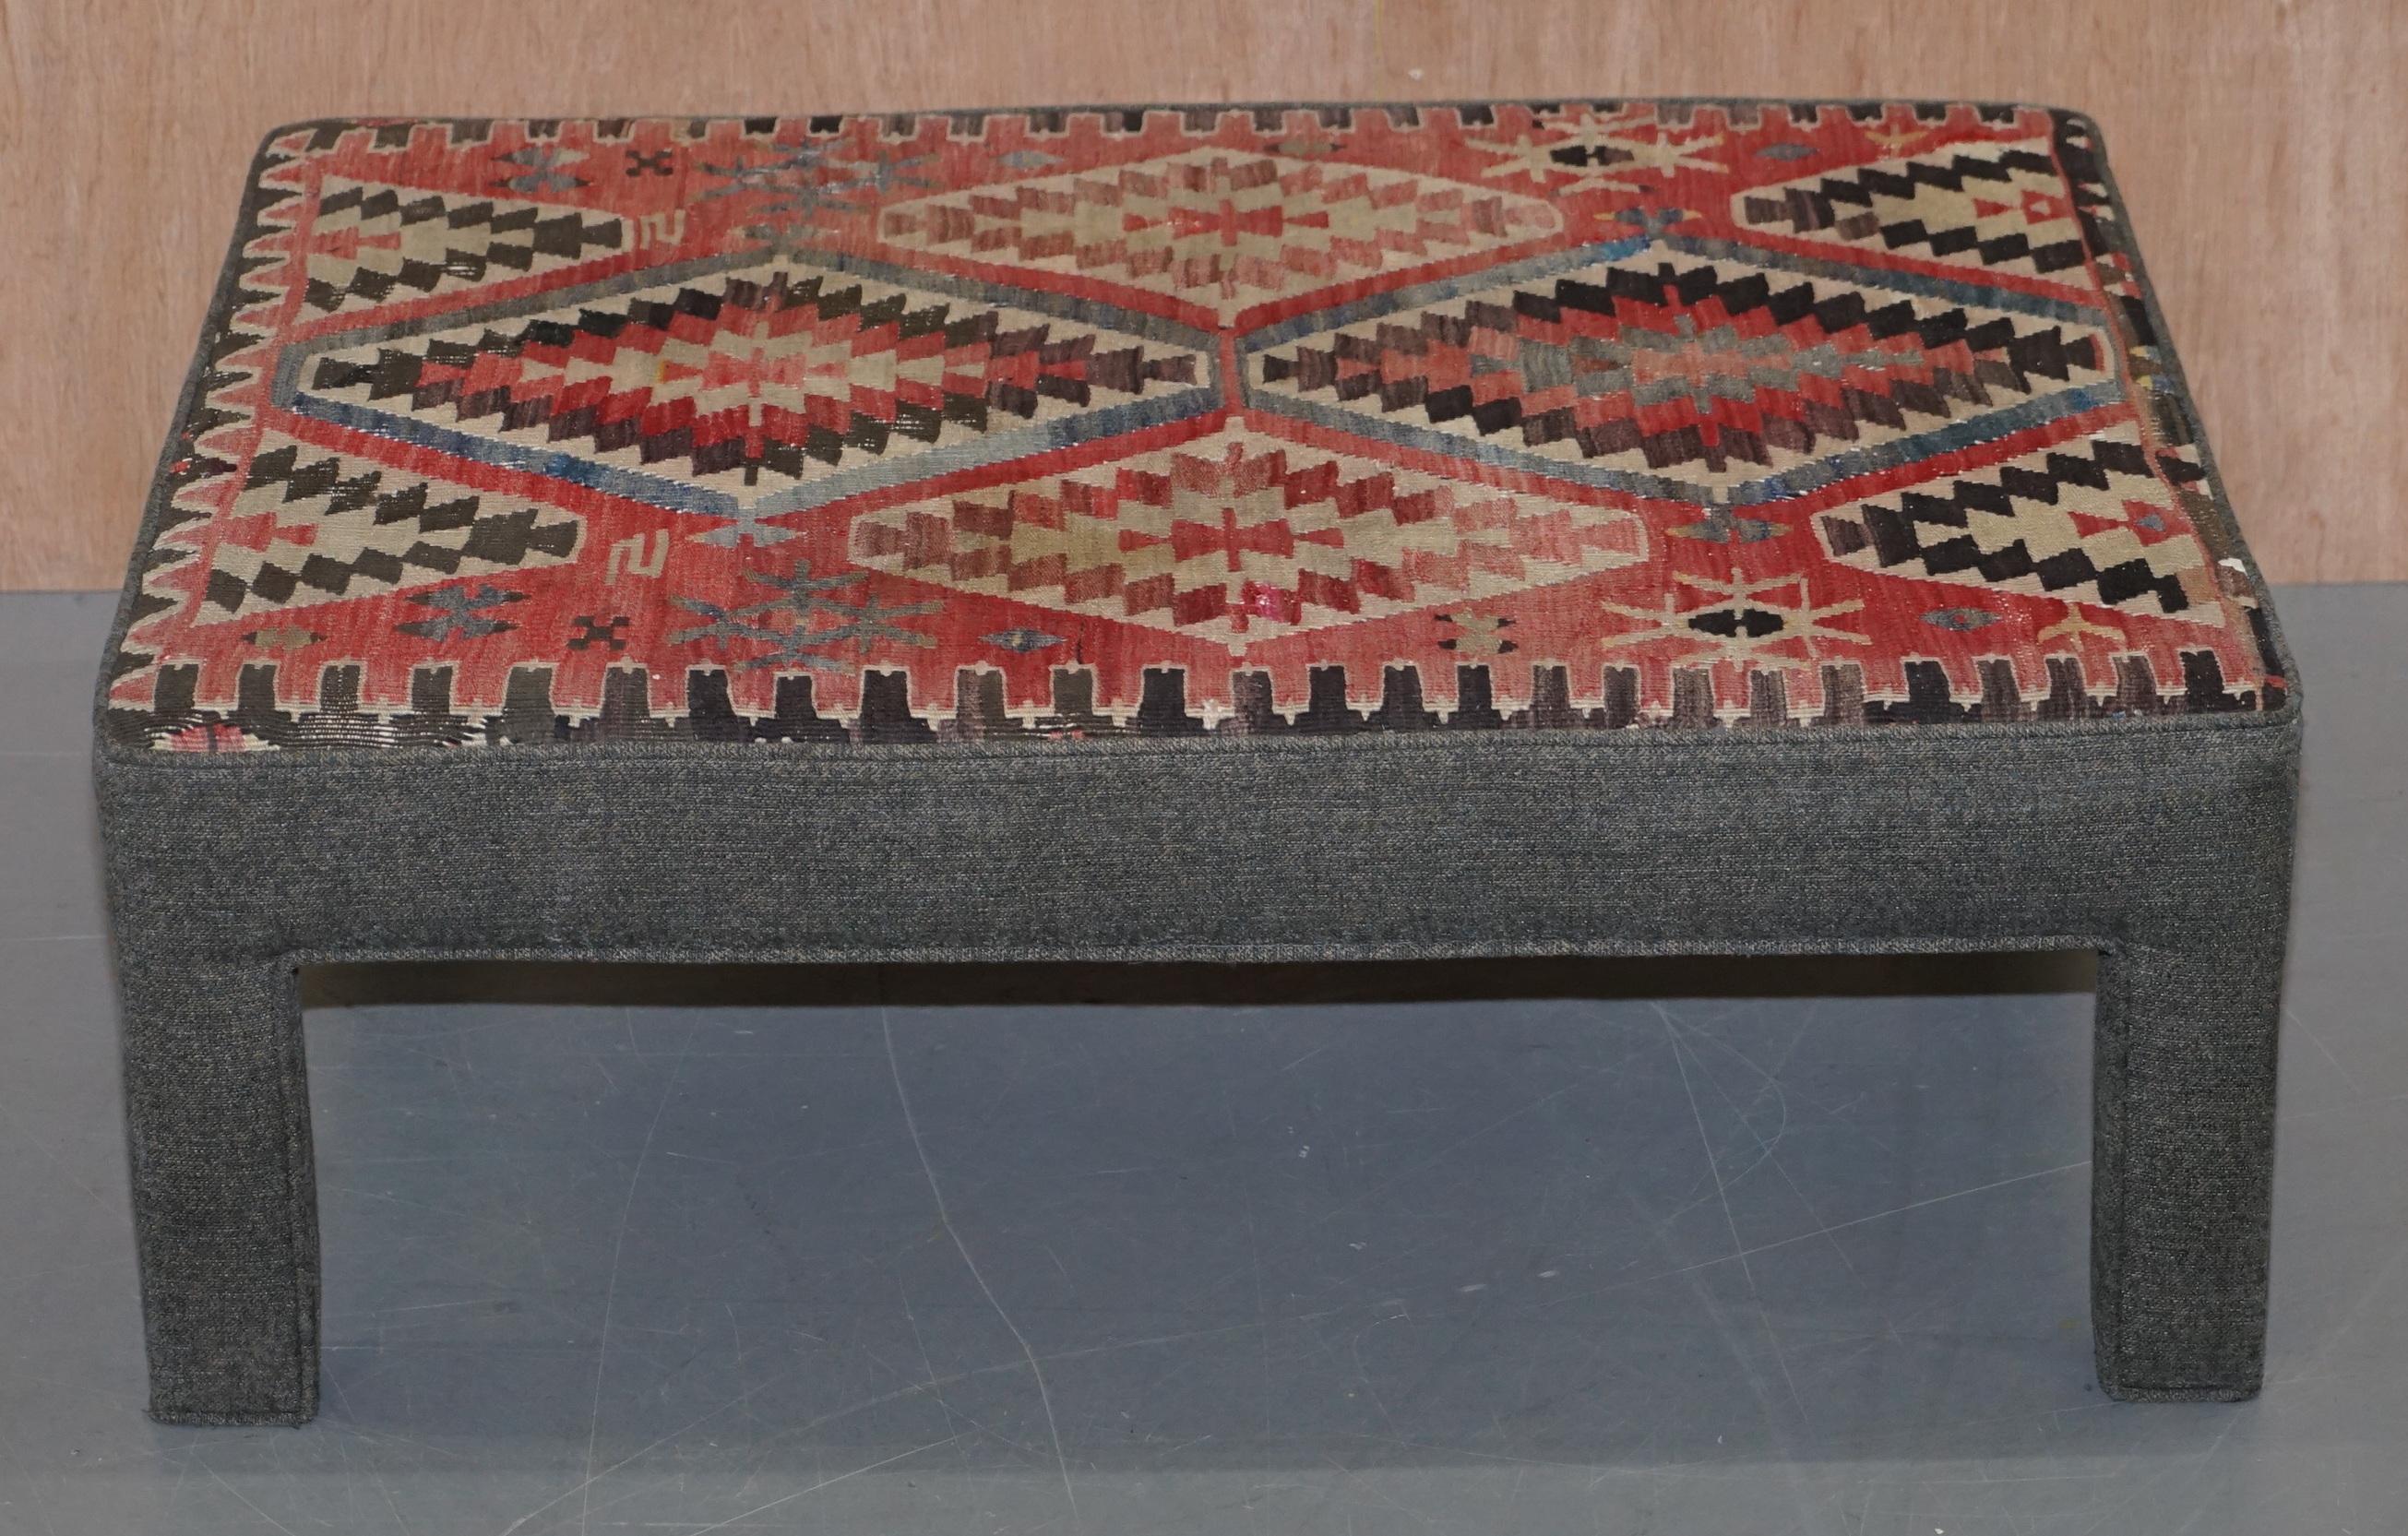 We are delighted to offer for sale this lovely vintage Kilim upholstered bench ottoman that can be used as a coffee table

A very well made and decorative piece, Kilim upholstery goes back to the mid Victorian era in this form, its very